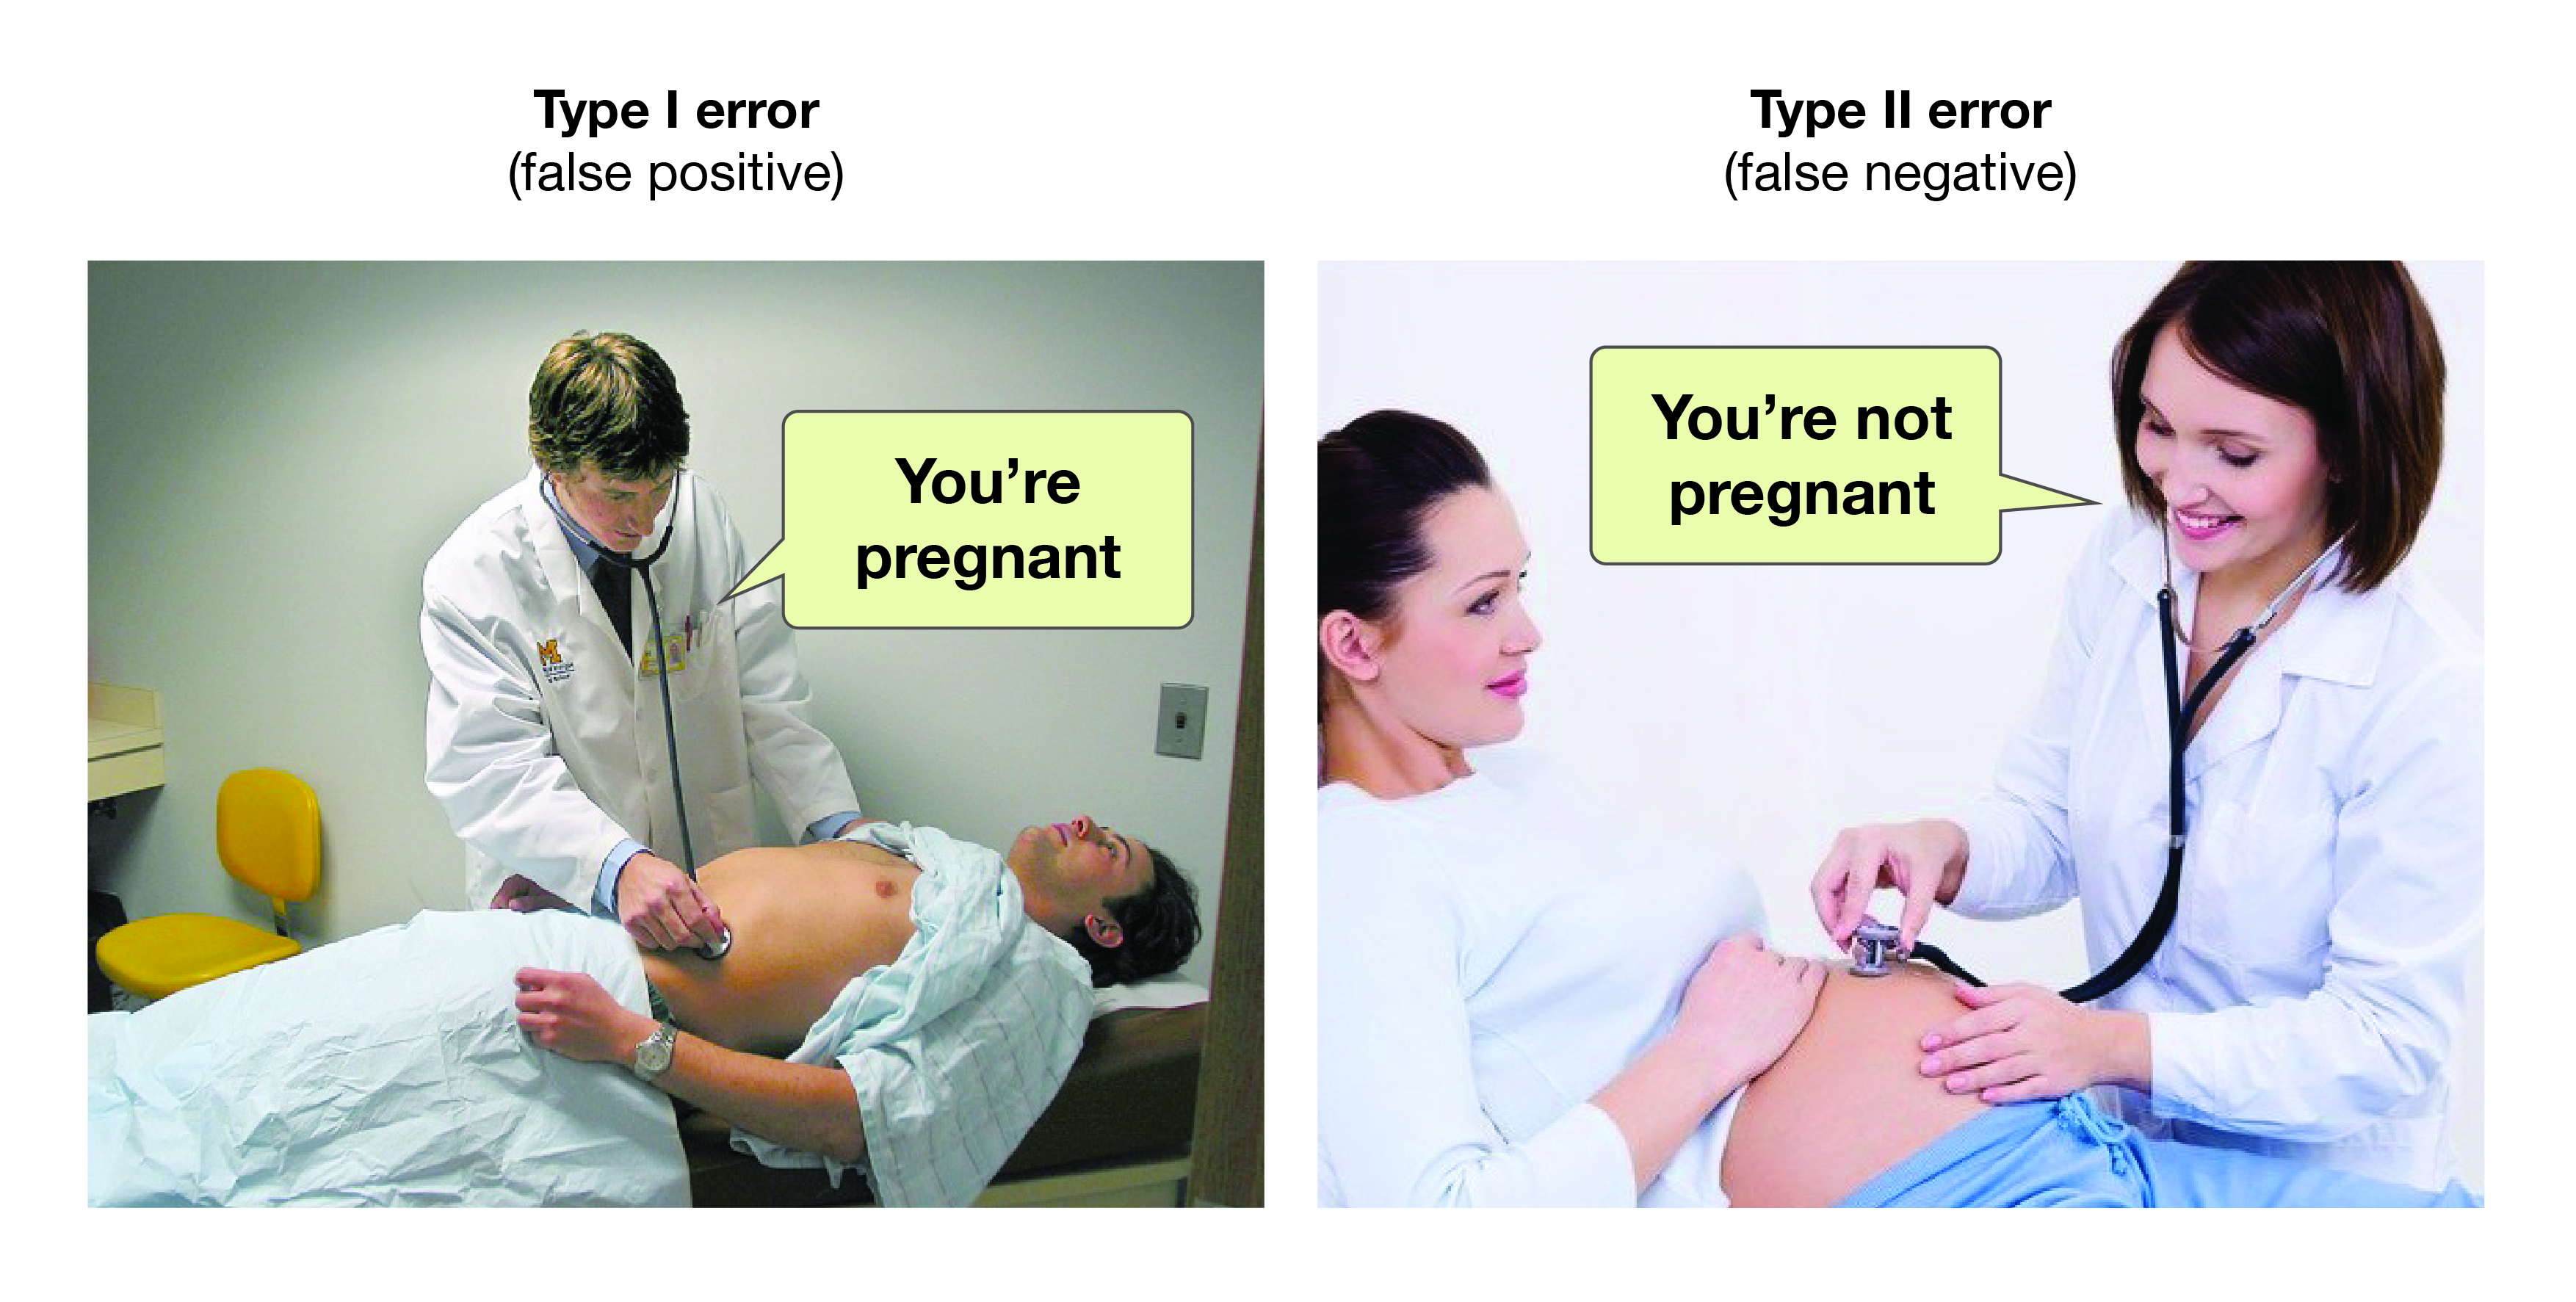 Figure 13.4 A man being told he is pregnant and a pregnant woman being told she is not pregnant.